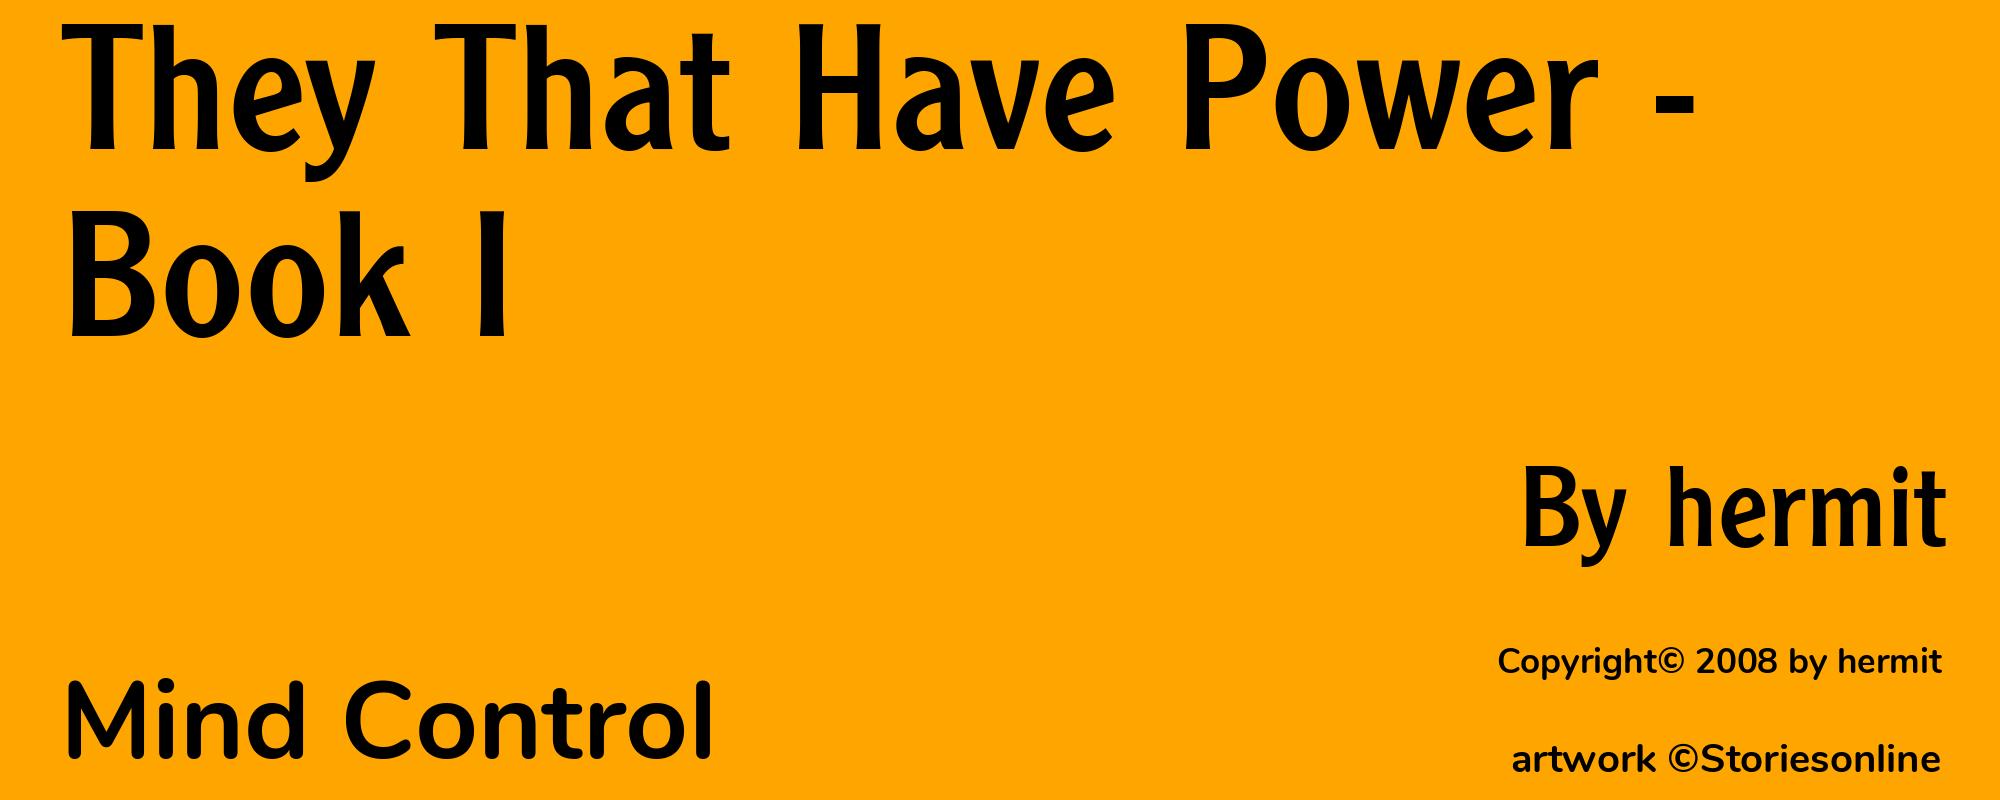 They That Have Power - Book I - Cover